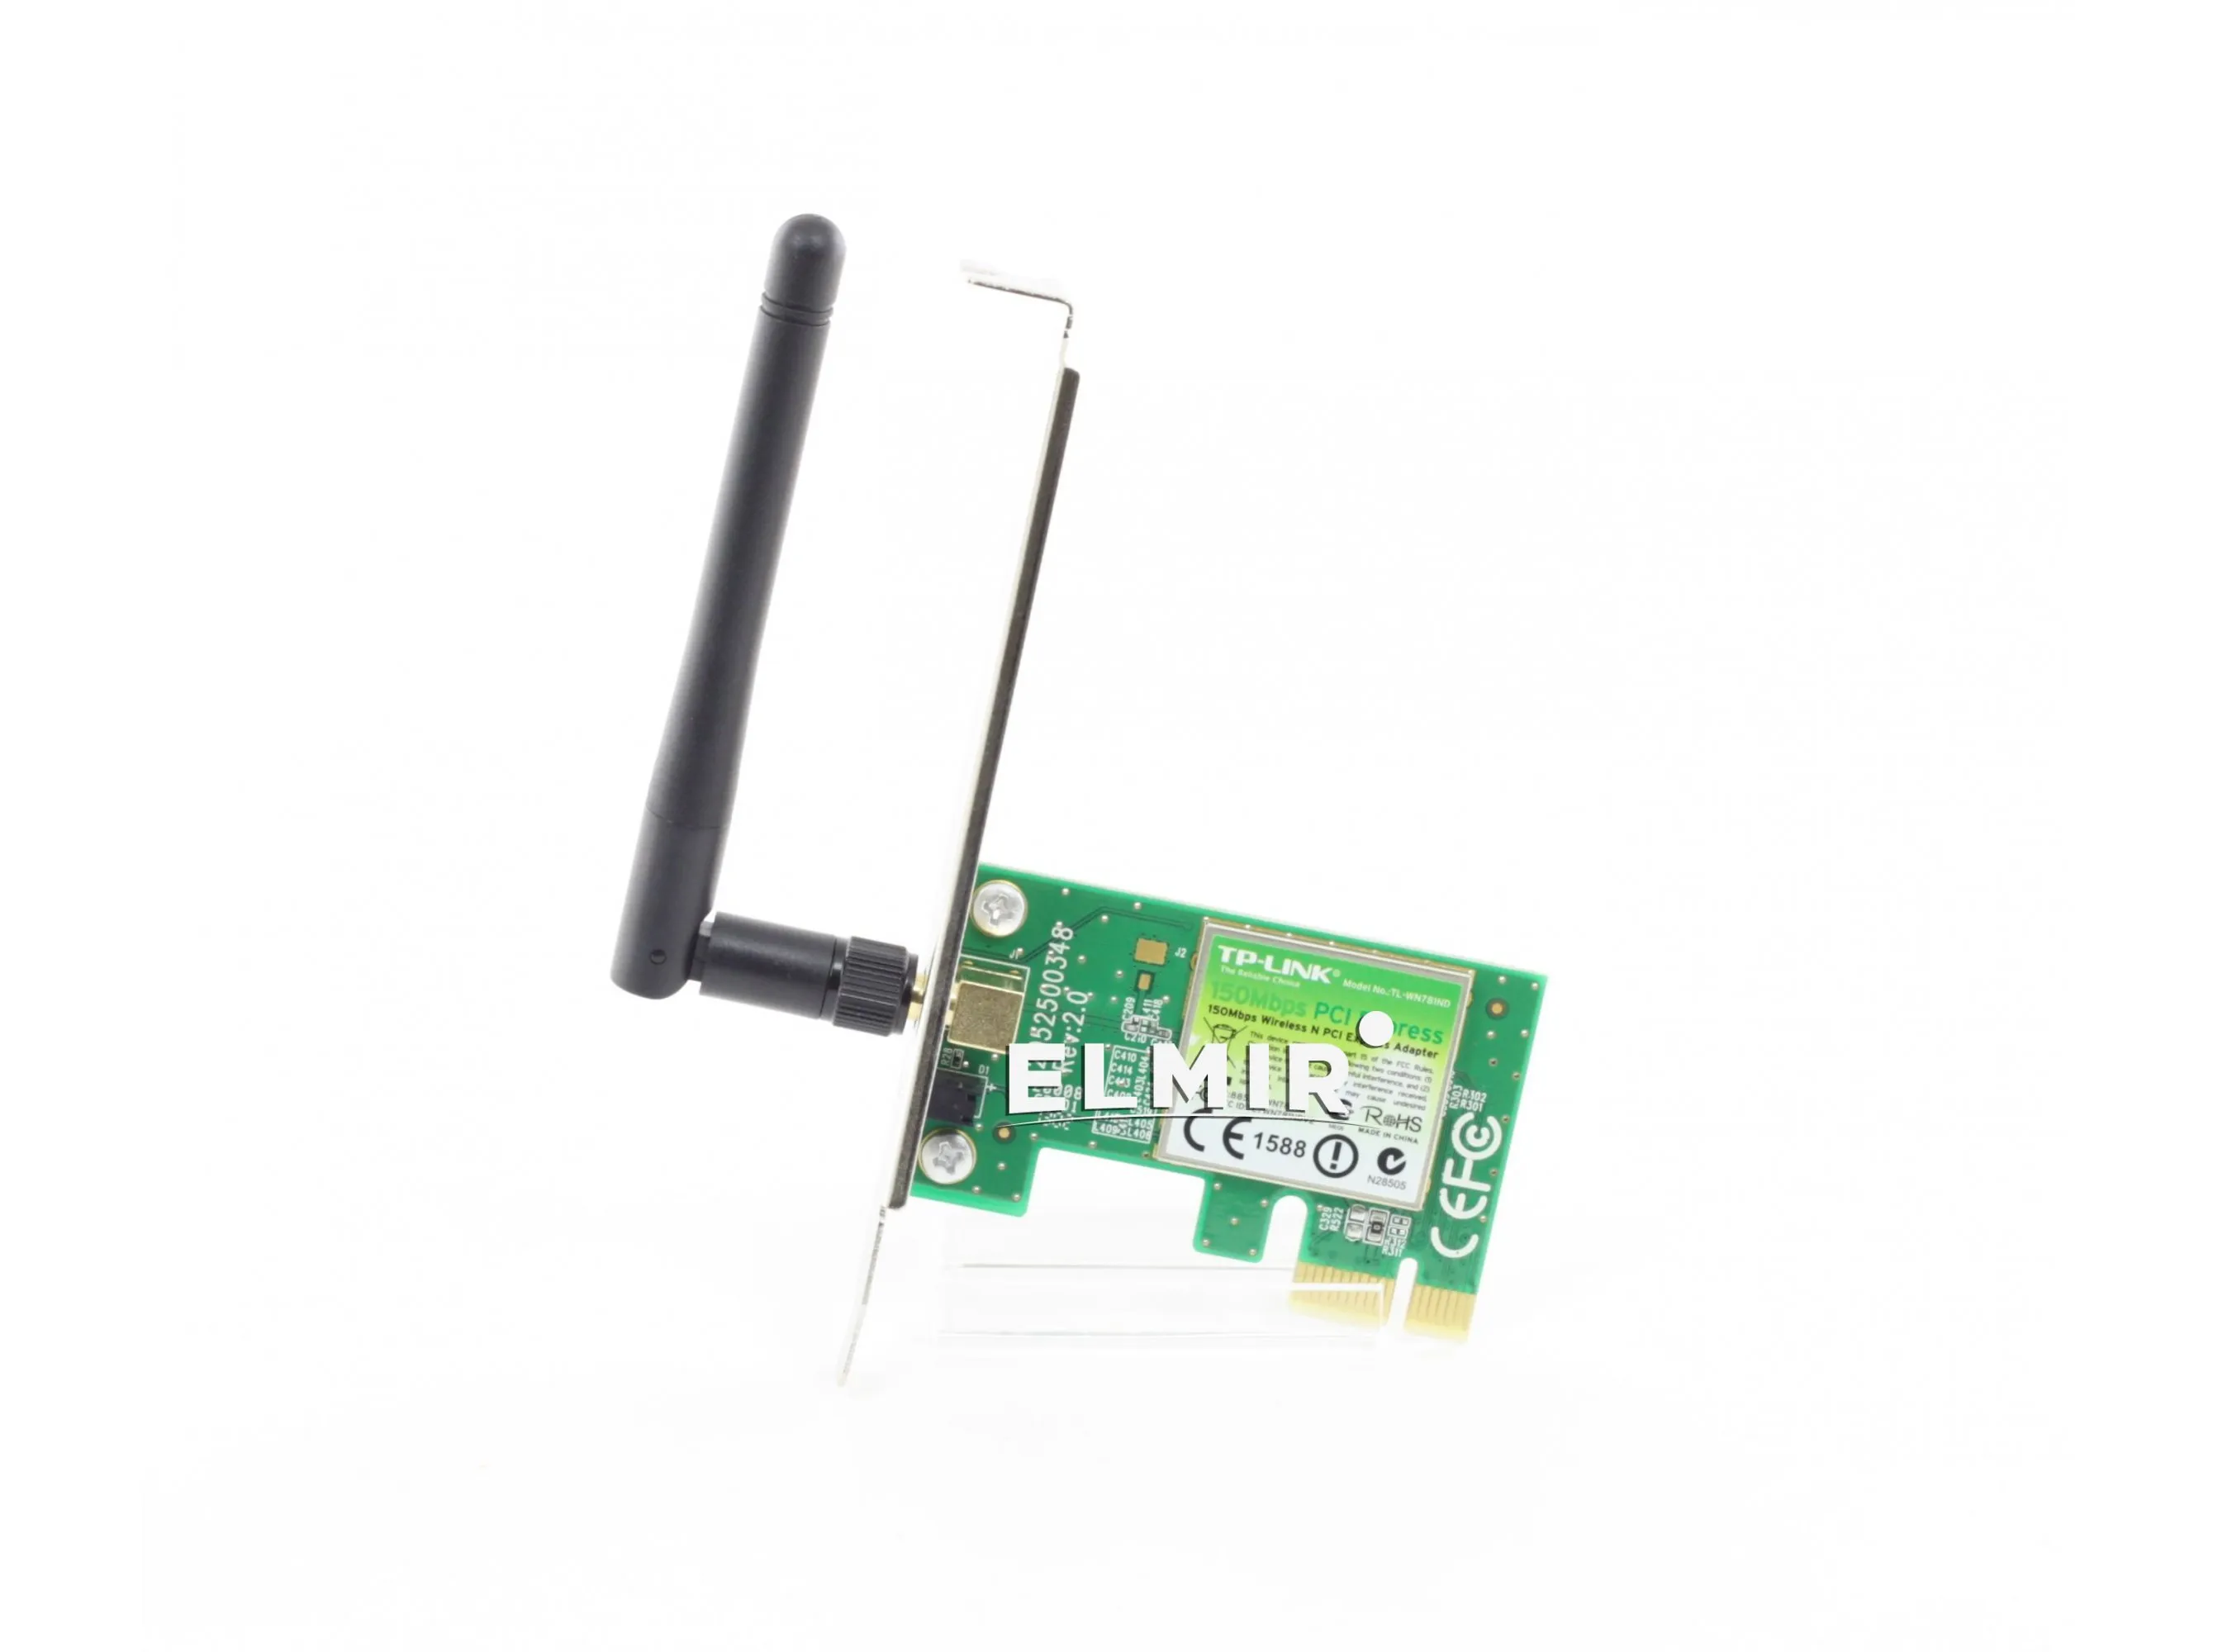 WiFi адаптер TL-WN781ND Wireless N PCI Express Adapter, Atheros, 1T1R, 2.4GHz, compatible with 802.11n/g/b, 1 detachable antenna#4